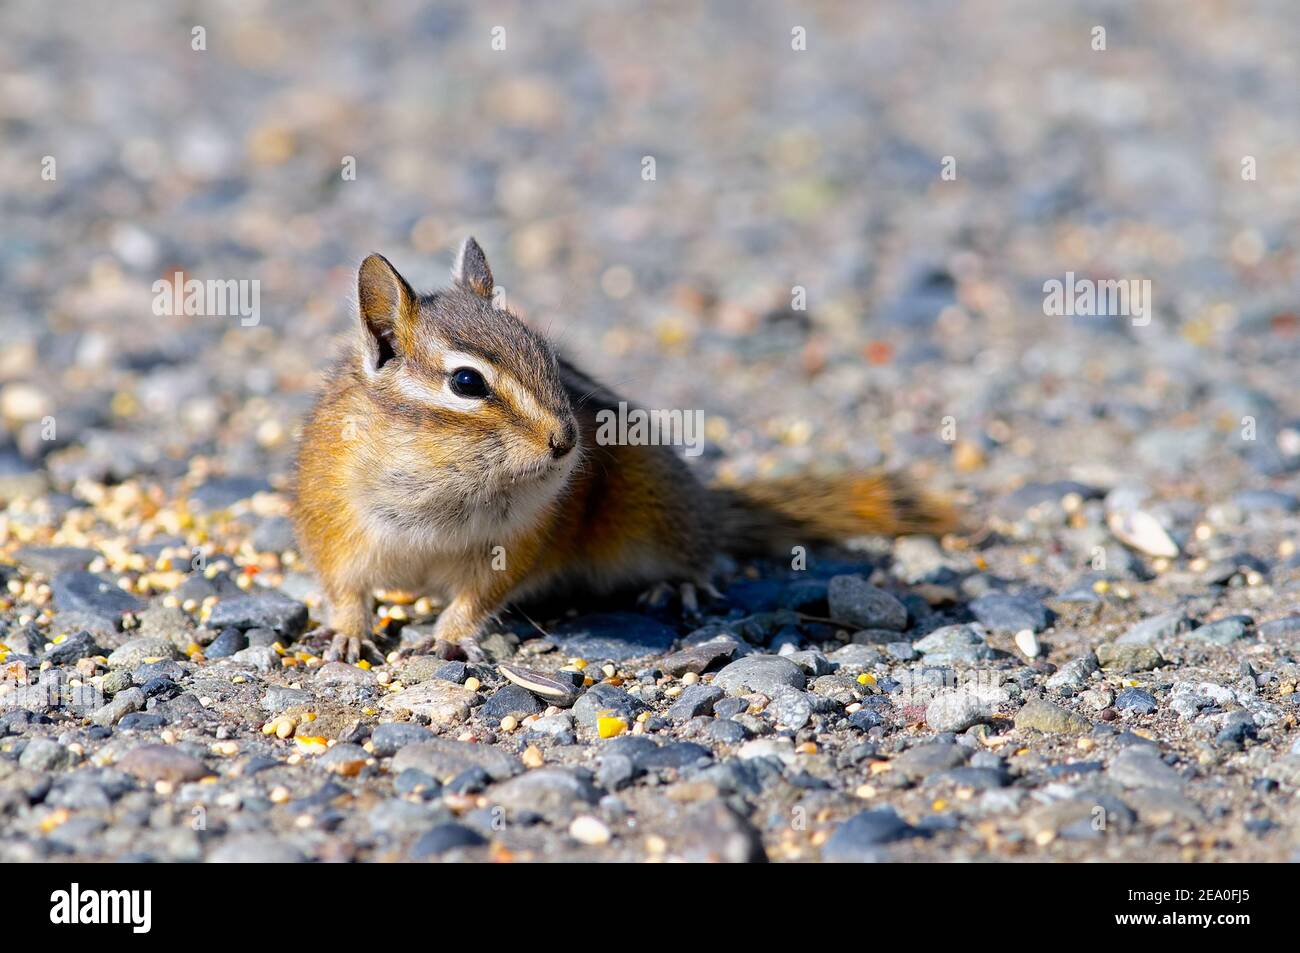 A Least Chipmunk (Tamias minimus) sitting on a gravel pathway with seeds spread around. Stock Photo